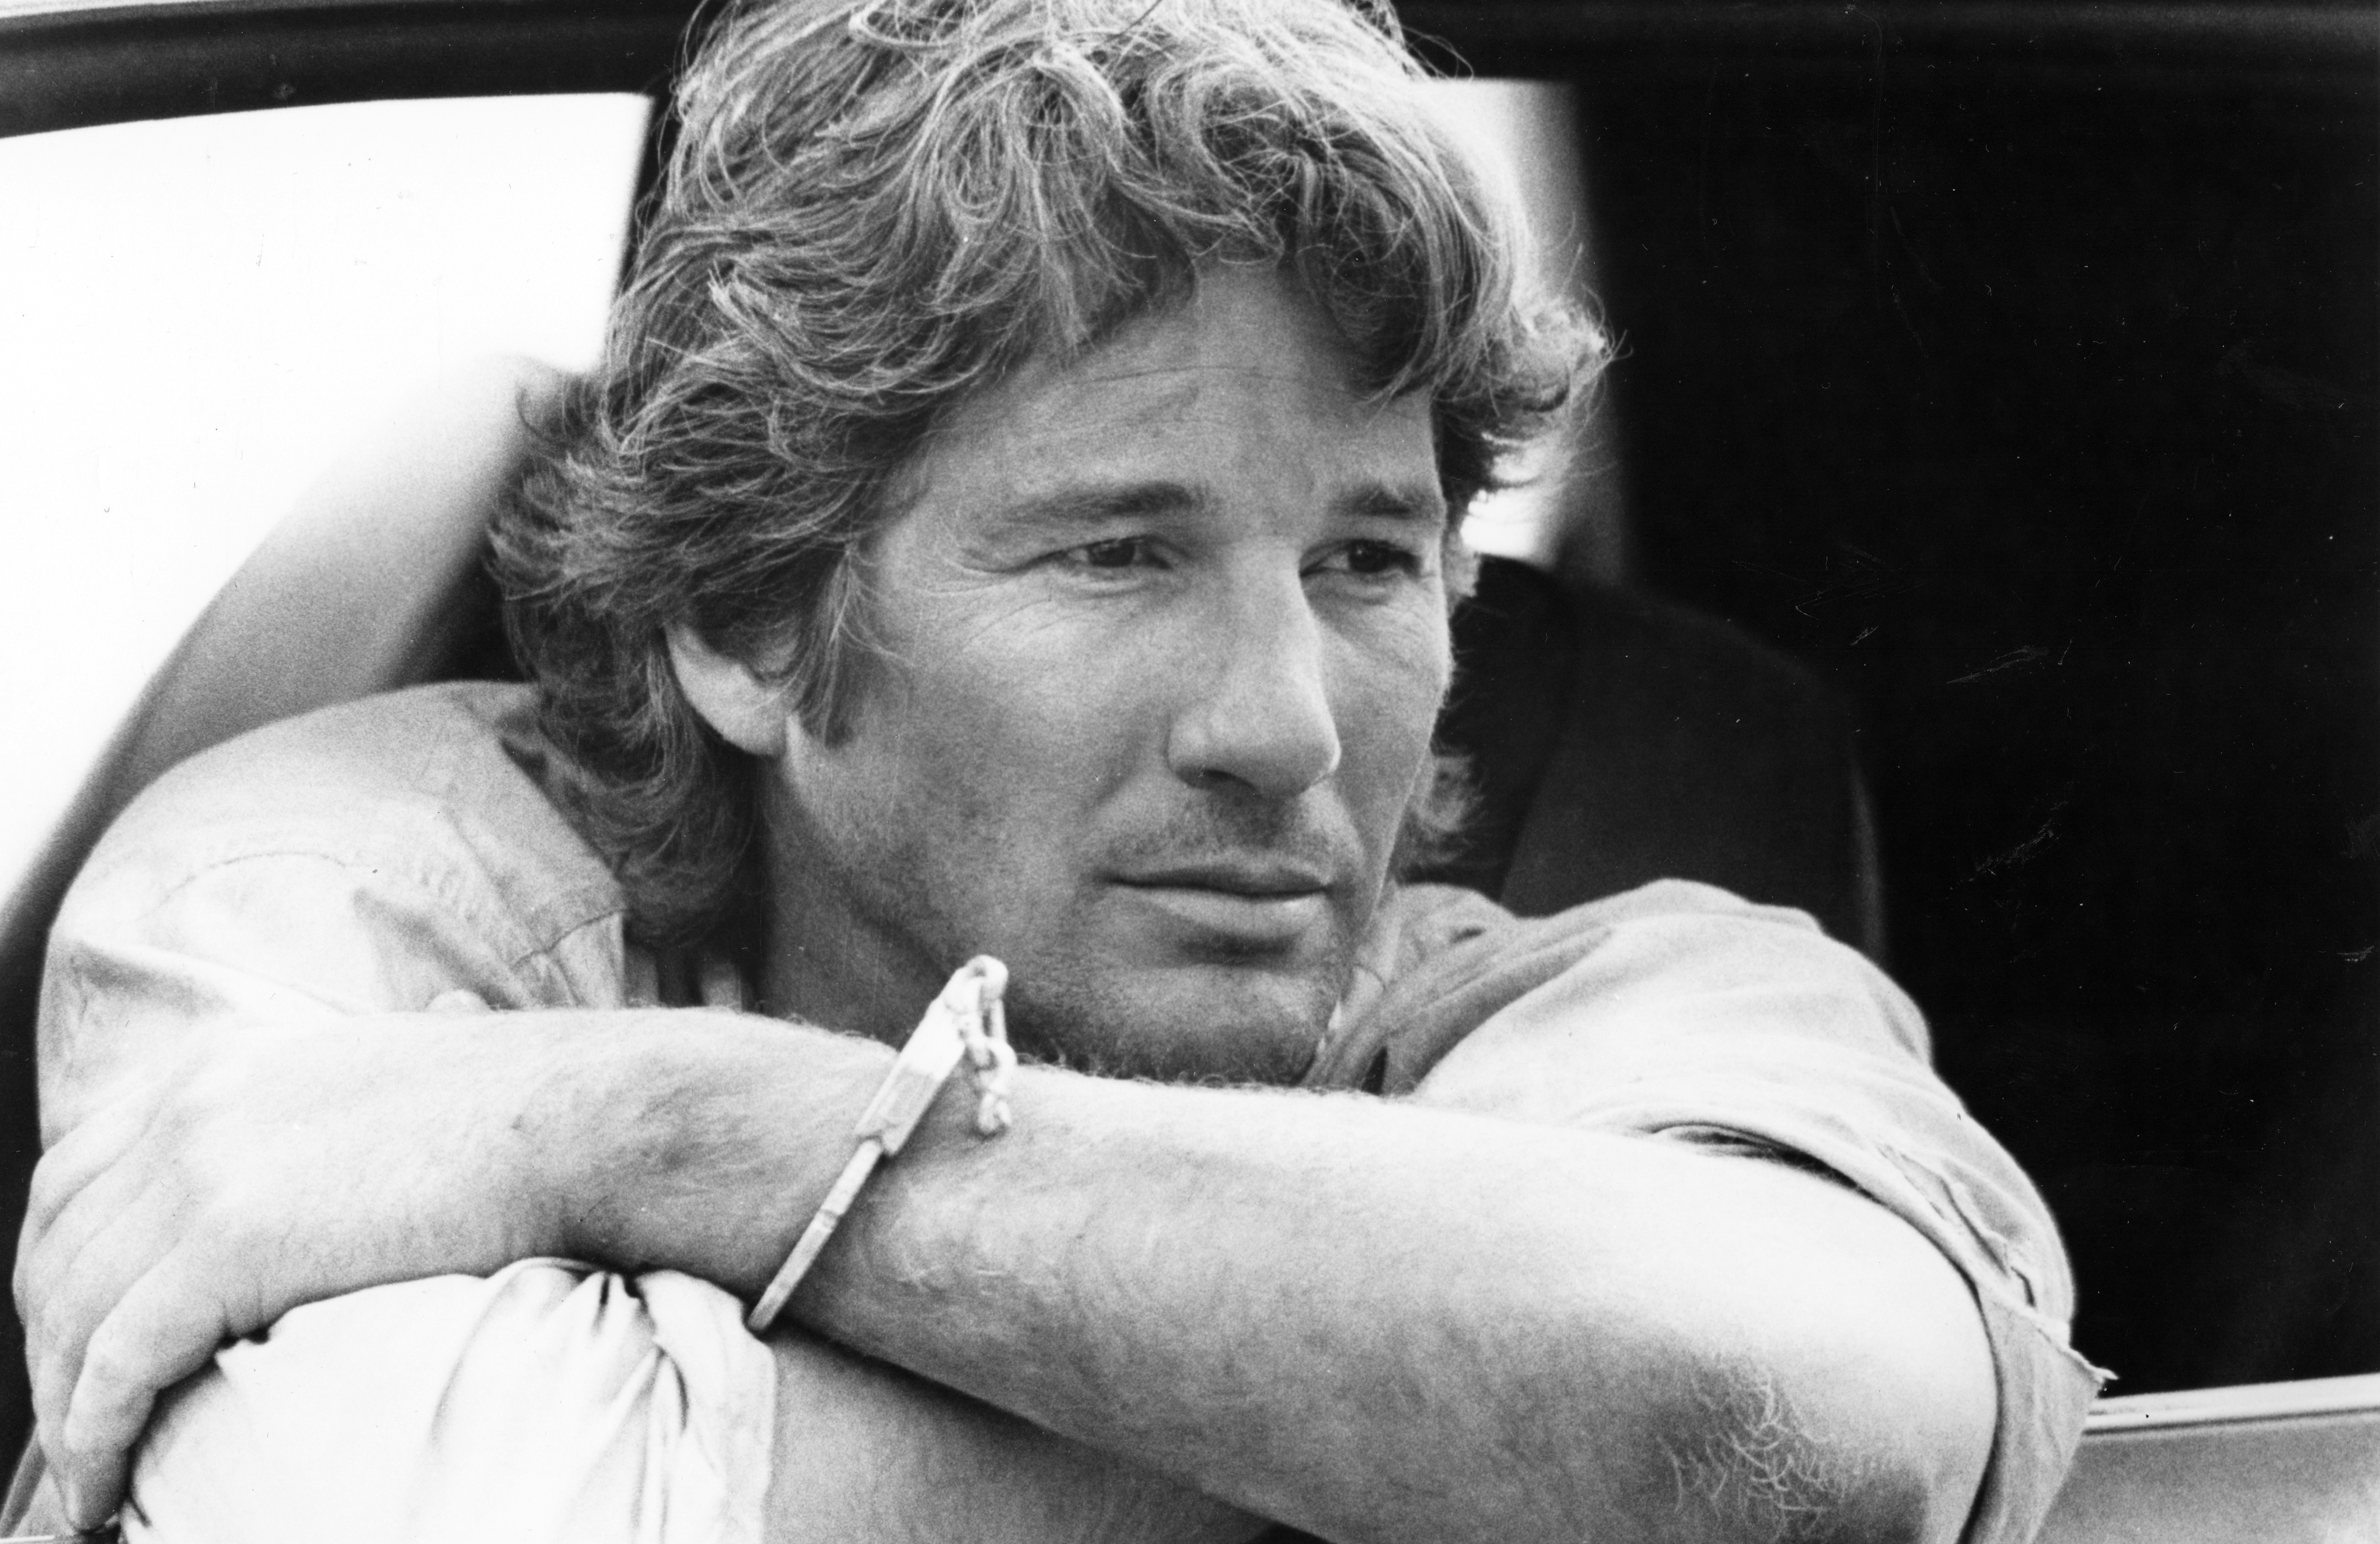 Richard Gere in "No Mercy" circa 1986 | Source: Getty Images